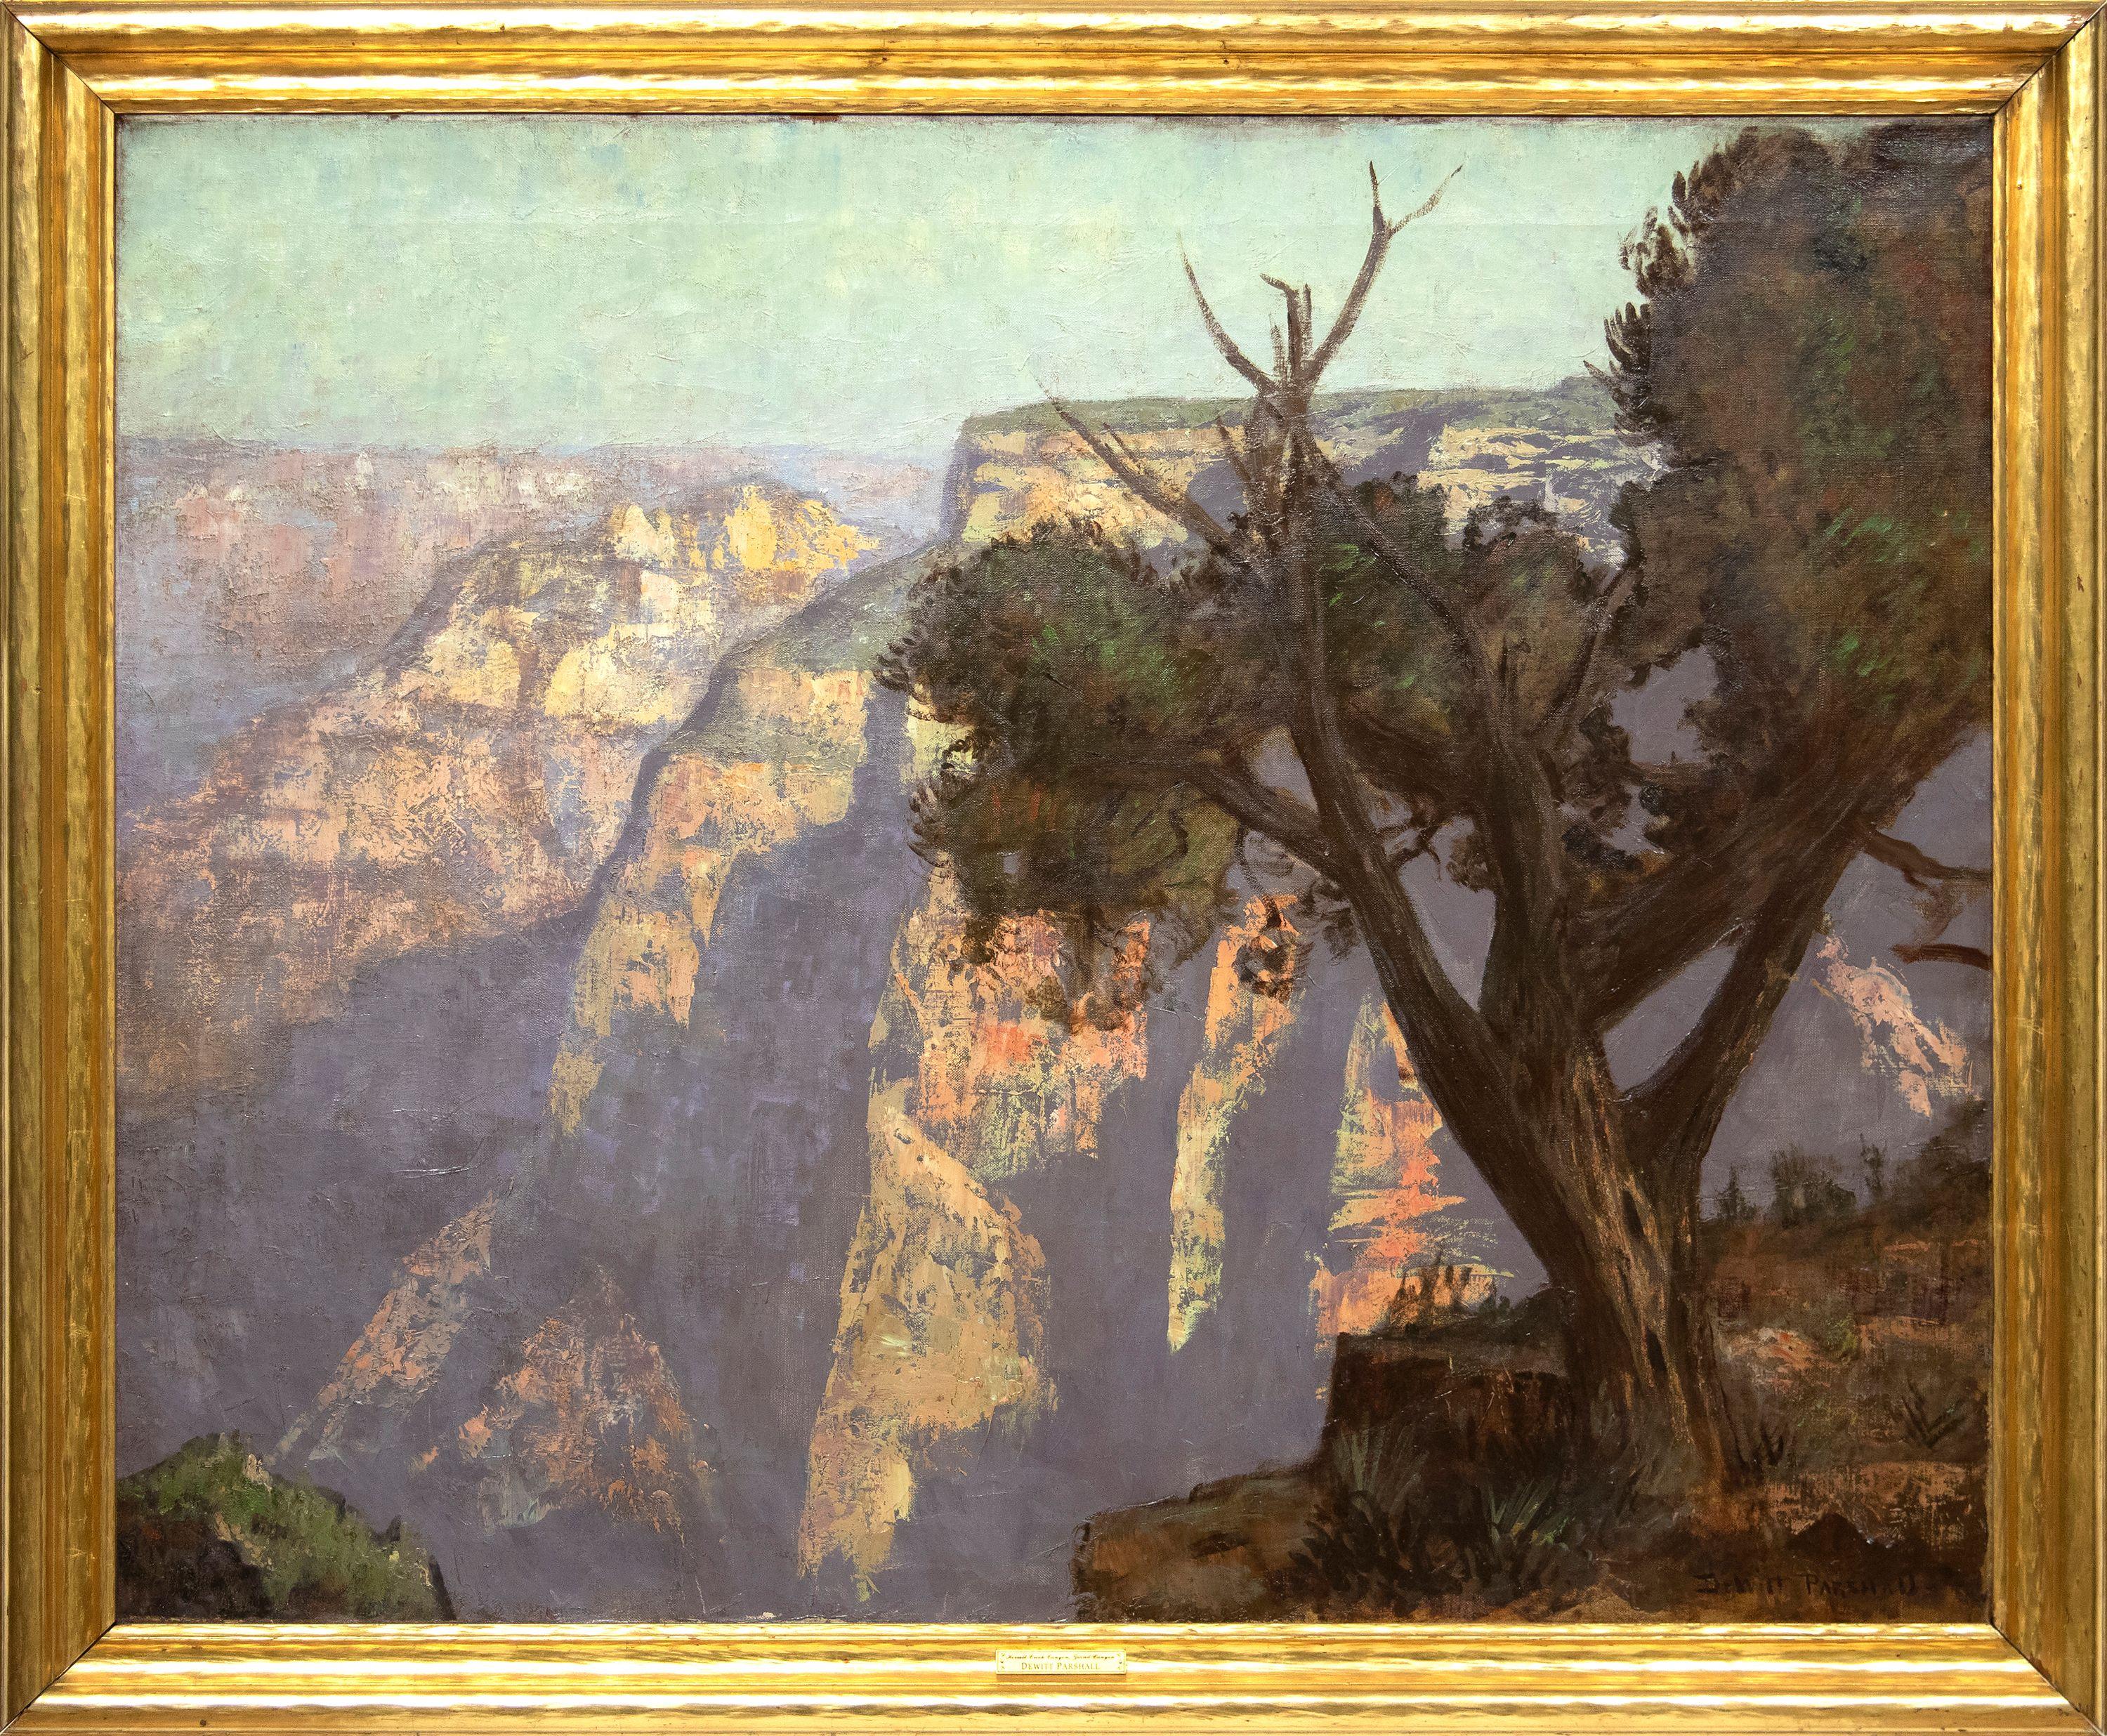 Hermit Creek Canyon, Grand Canyon - Painting by PARSHALL, DEWITT